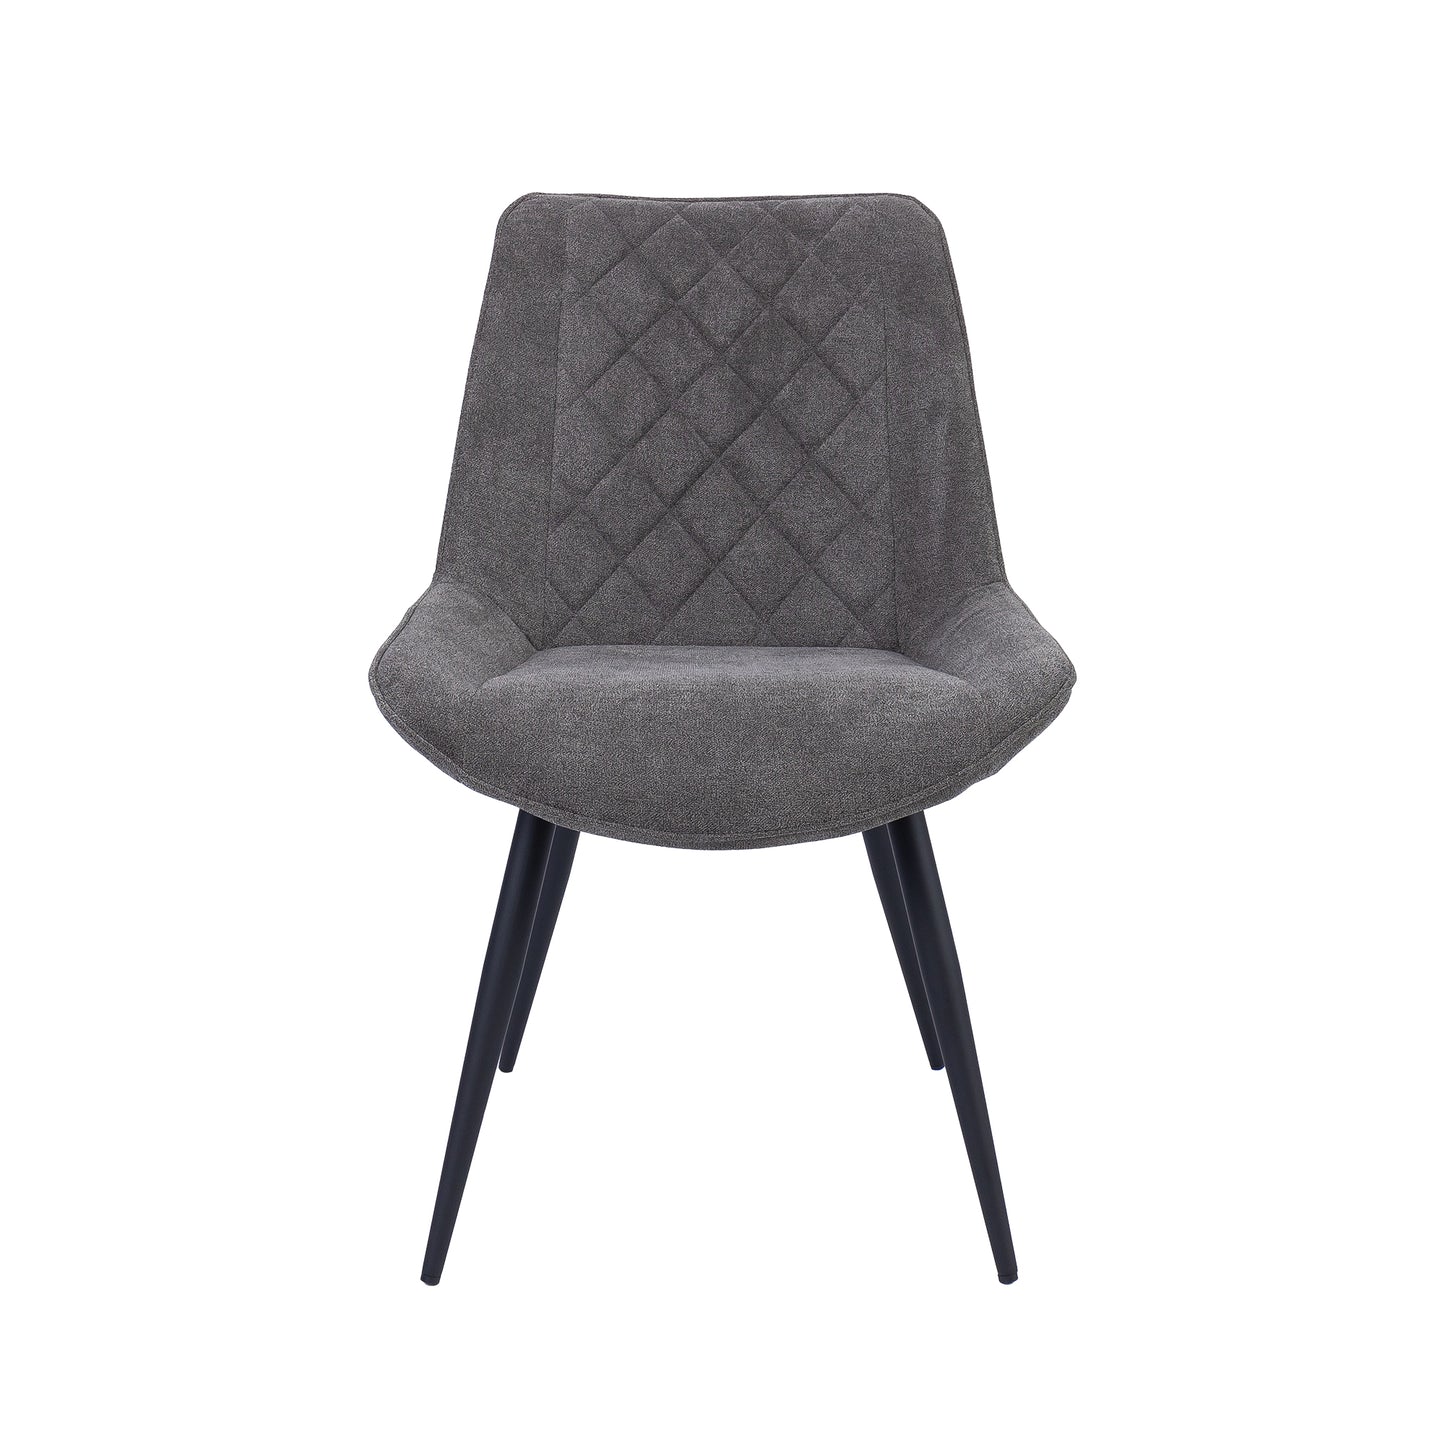 Helenium Dining Chair Set of 6 Fabric Seat with Metal Frame - Graphite